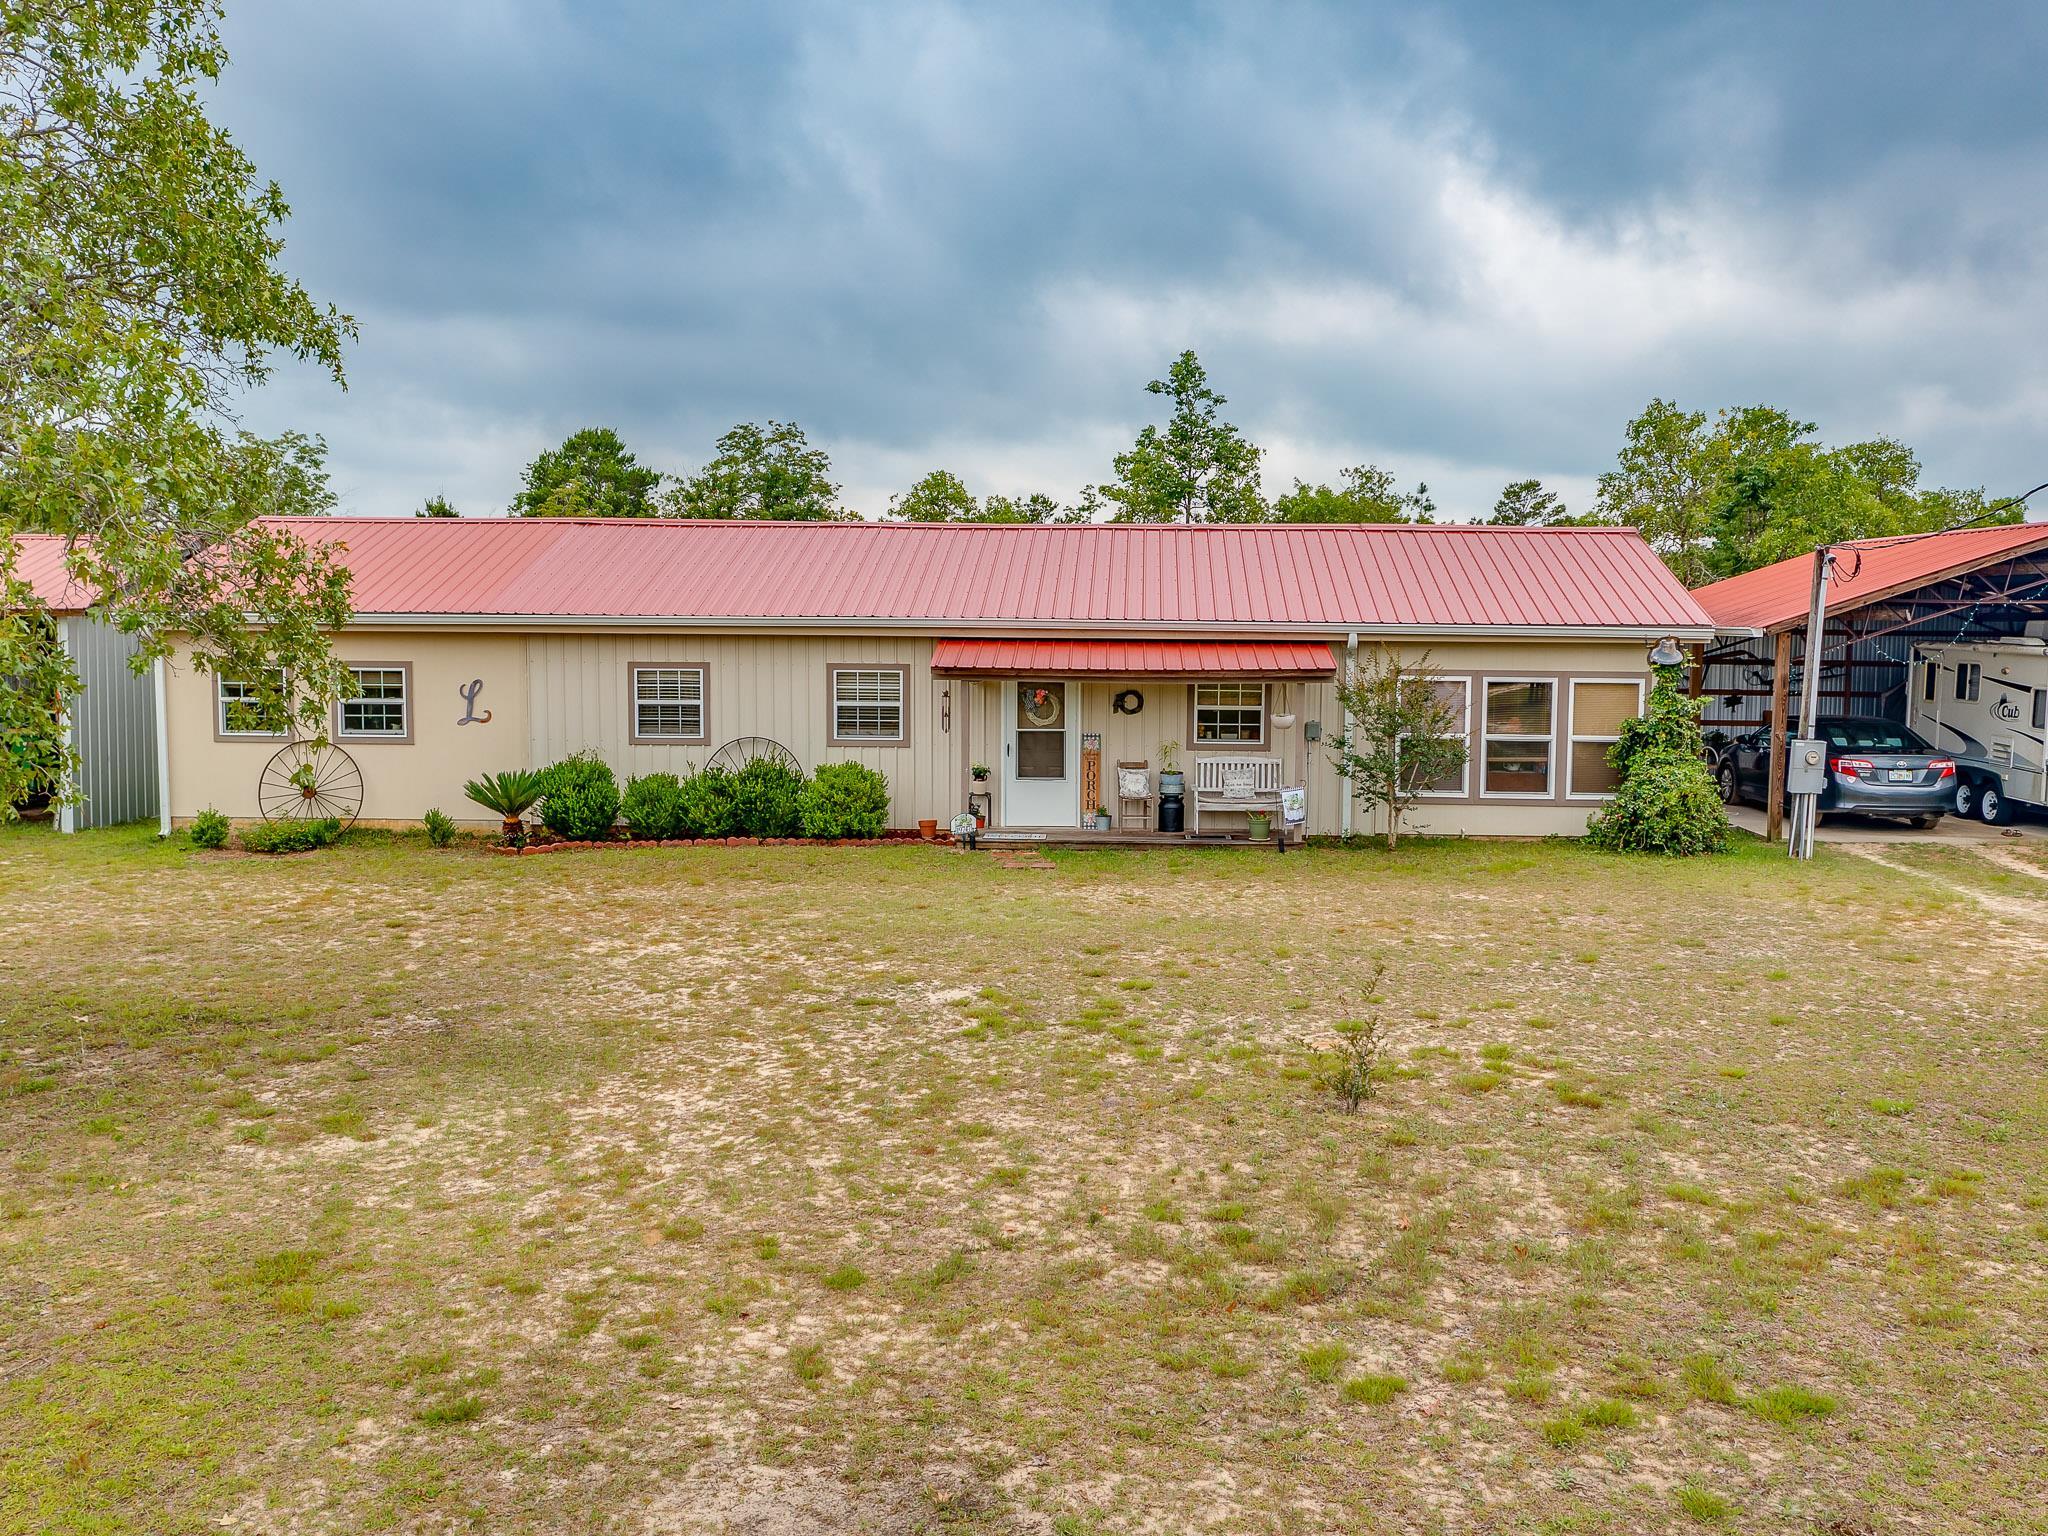 19747 NW Westerfield Road,ALTHA,Florida 32421,2 Bedrooms Bedrooms,2 BathroomsBathrooms,Detached single family,19747 NW Westerfield Road,367506